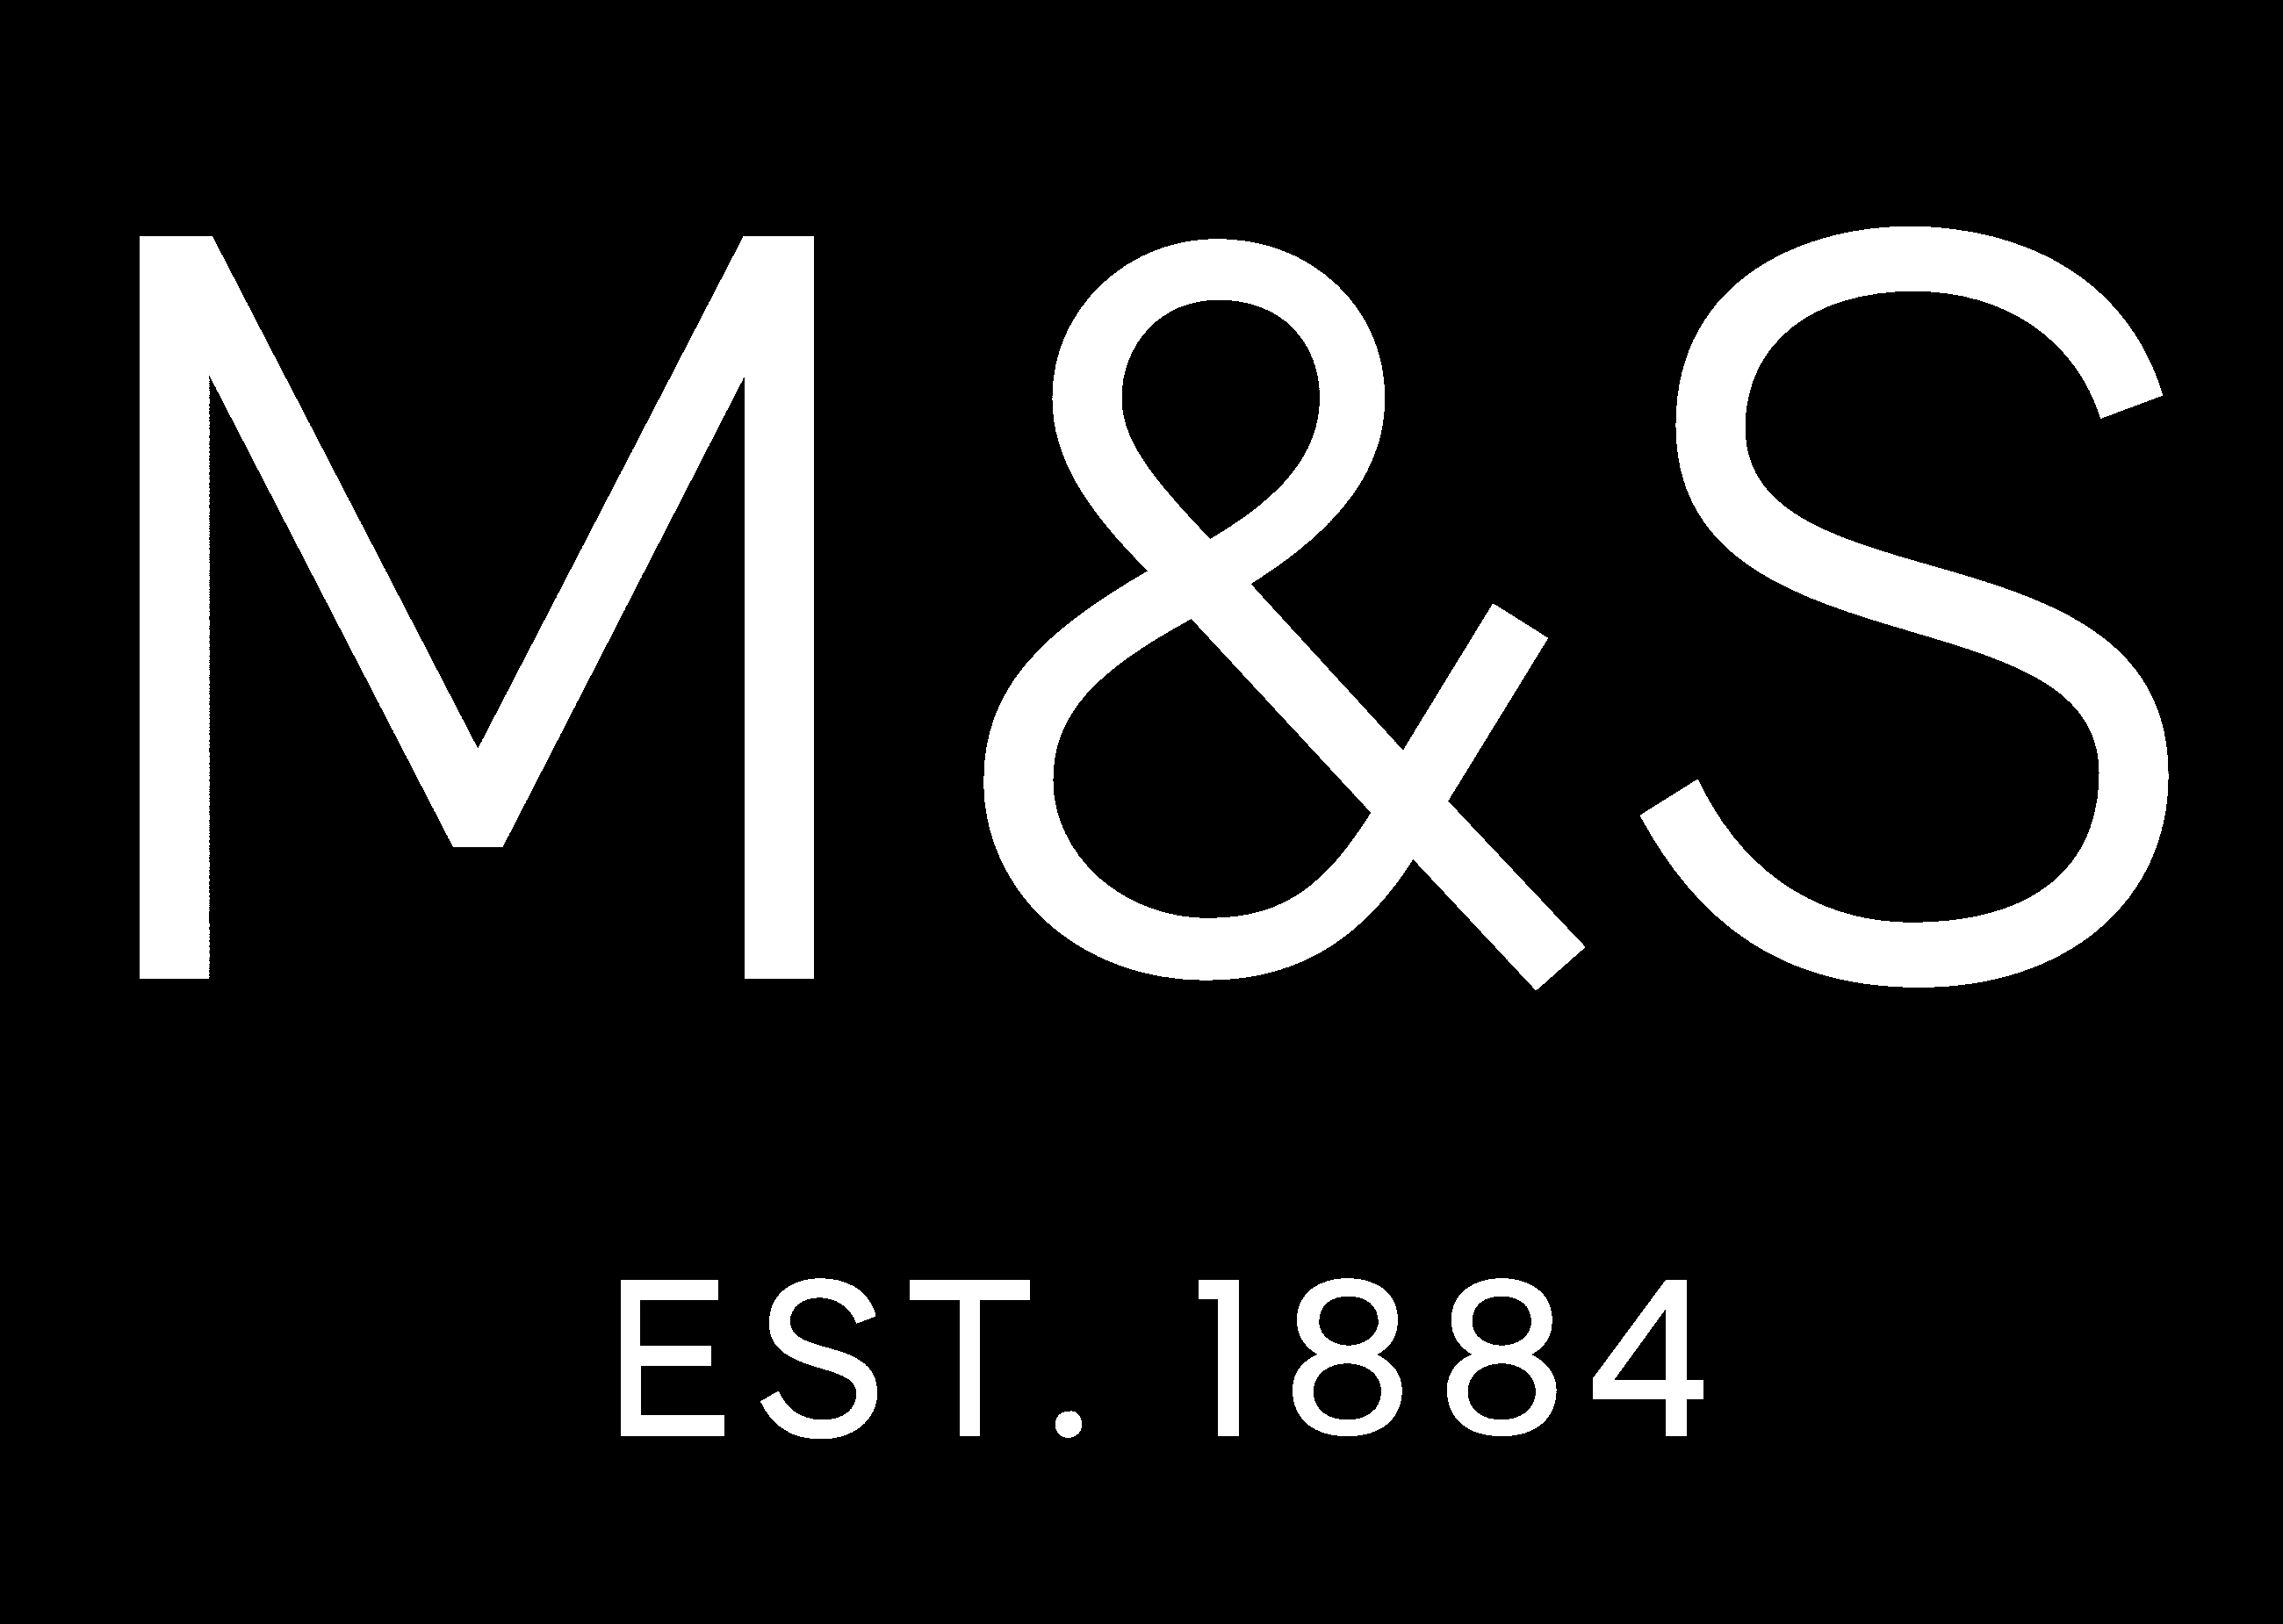 Meaning Marks and Spencer logo and symbol.